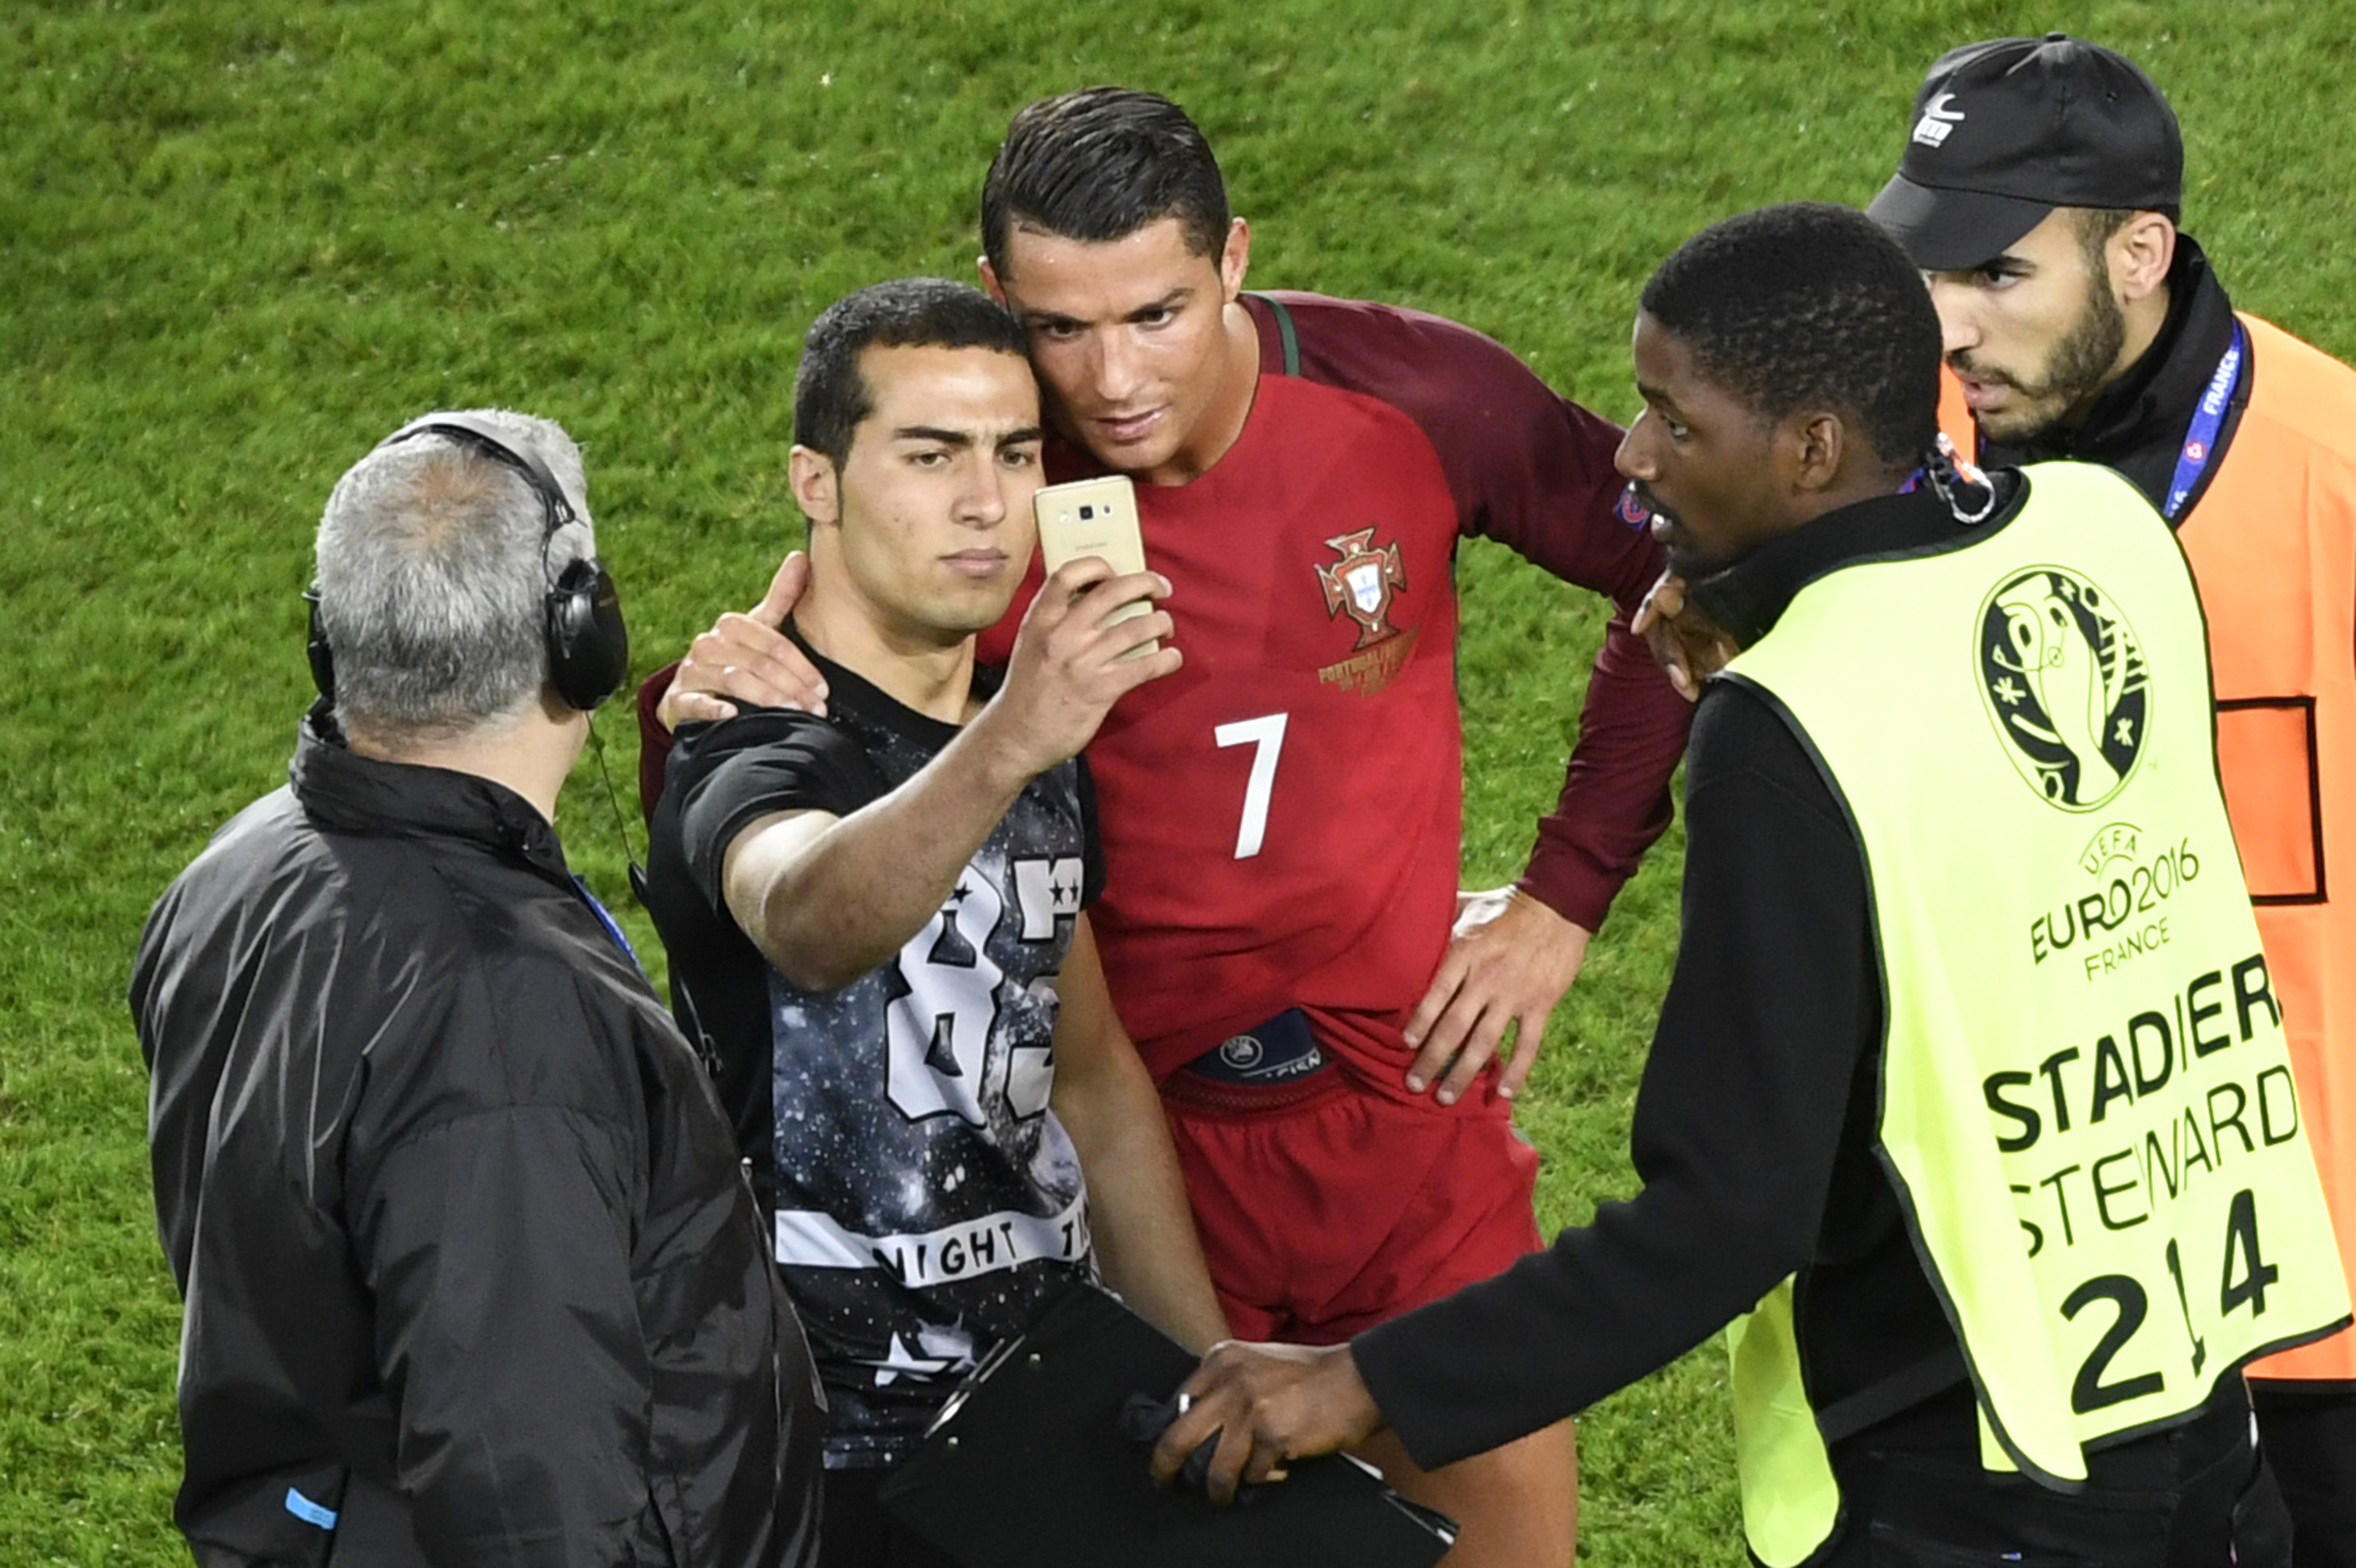 Daily Football — Cristiano Ronaldo takes a selfie with a fan at